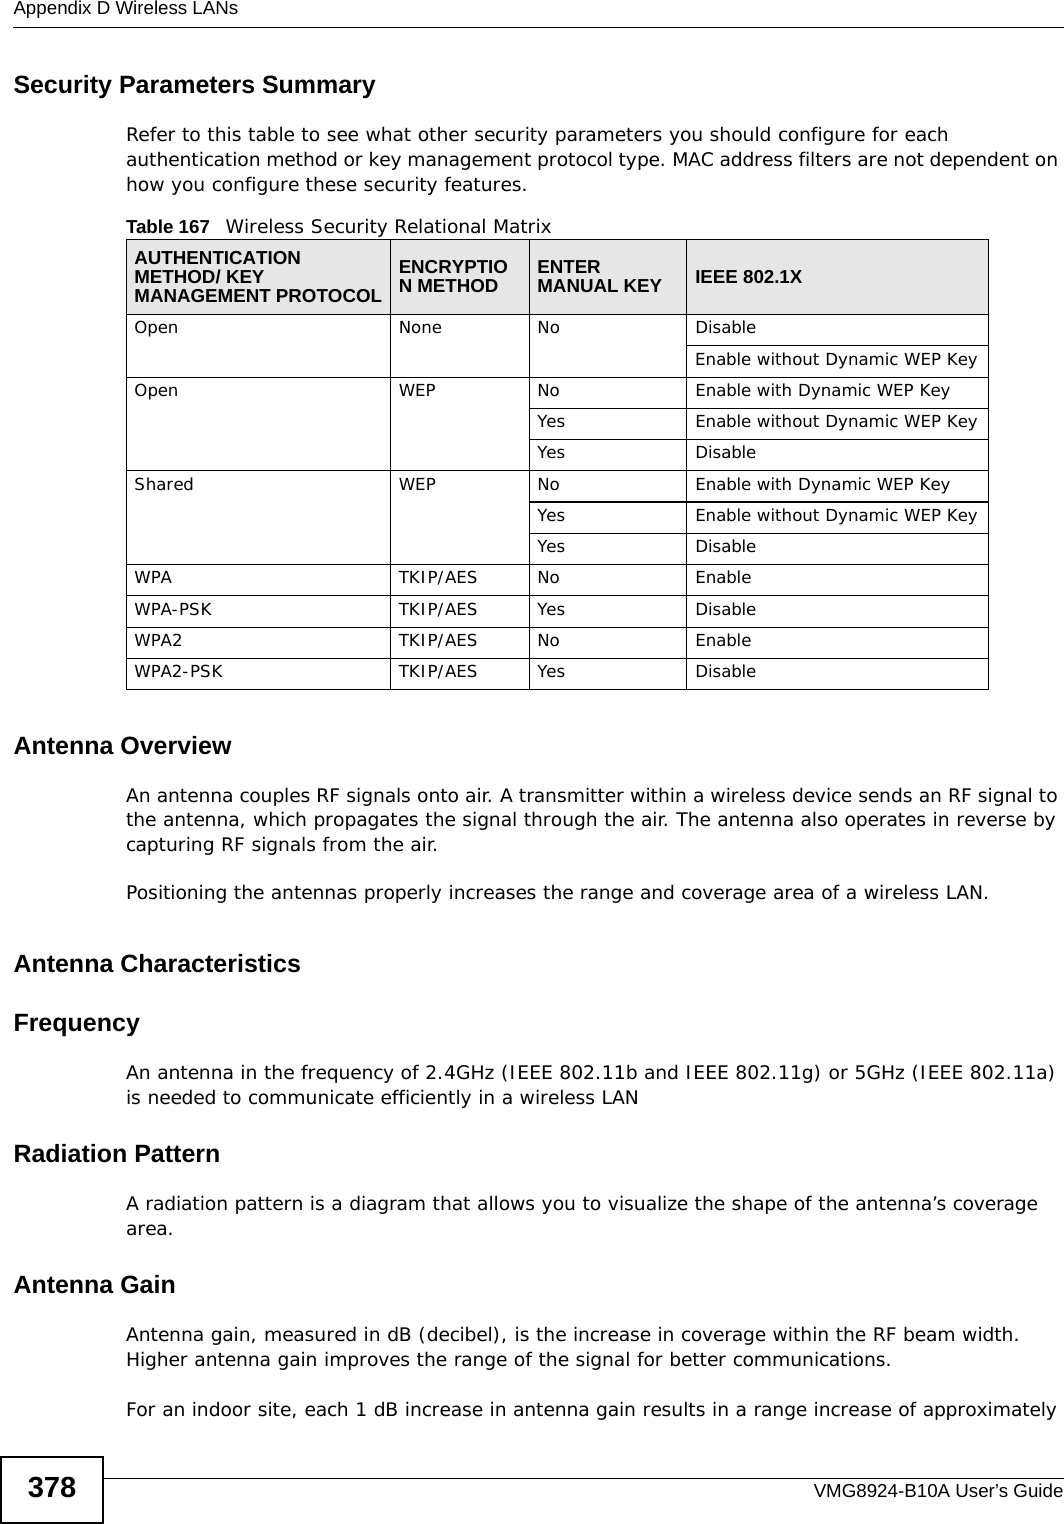 Appendix D Wireless LANsVMG8924-B10A User’s Guide378Security Parameters SummaryRefer to this table to see what other security parameters you should configure for each authentication method or key management protocol type. MAC address filters are not dependent on how you configure these security features.Antenna OverviewAn antenna couples RF signals onto air. A transmitter within a wireless device sends an RF signal to the antenna, which propagates the signal through the air. The antenna also operates in reverse by capturing RF signals from the air. Positioning the antennas properly increases the range and coverage area of a wireless LAN. Antenna CharacteristicsFrequencyAn antenna in the frequency of 2.4GHz (IEEE 802.11b and IEEE 802.11g) or 5GHz (IEEE 802.11a) is needed to communicate efficiently in a wireless LANRadiation PatternA radiation pattern is a diagram that allows you to visualize the shape of the antenna’s coverage area. Antenna GainAntenna gain, measured in dB (decibel), is the increase in coverage within the RF beam width. Higher antenna gain improves the range of the signal for better communications. For an indoor site, each 1 dB increase in antenna gain results in a range increase of approximately Table 167   Wireless Security Relational MatrixAUTHENTICATION METHOD/ KEY MANAGEMENT PROTOCOLENCRYPTION METHOD ENTER MANUAL KEY IEEE 802.1XOpen None No DisableEnable without Dynamic WEP KeyOpen WEP No           Enable with Dynamic WEP KeyYes Enable without Dynamic WEP KeyYes DisableShared WEP  No           Enable with Dynamic WEP KeyYes Enable without Dynamic WEP KeyYes DisableWPA  TKIP/AES No EnableWPA-PSK  TKIP/AES Yes DisableWPA2 TKIP/AES No EnableWPA2-PSK  TKIP/AES Yes Disable